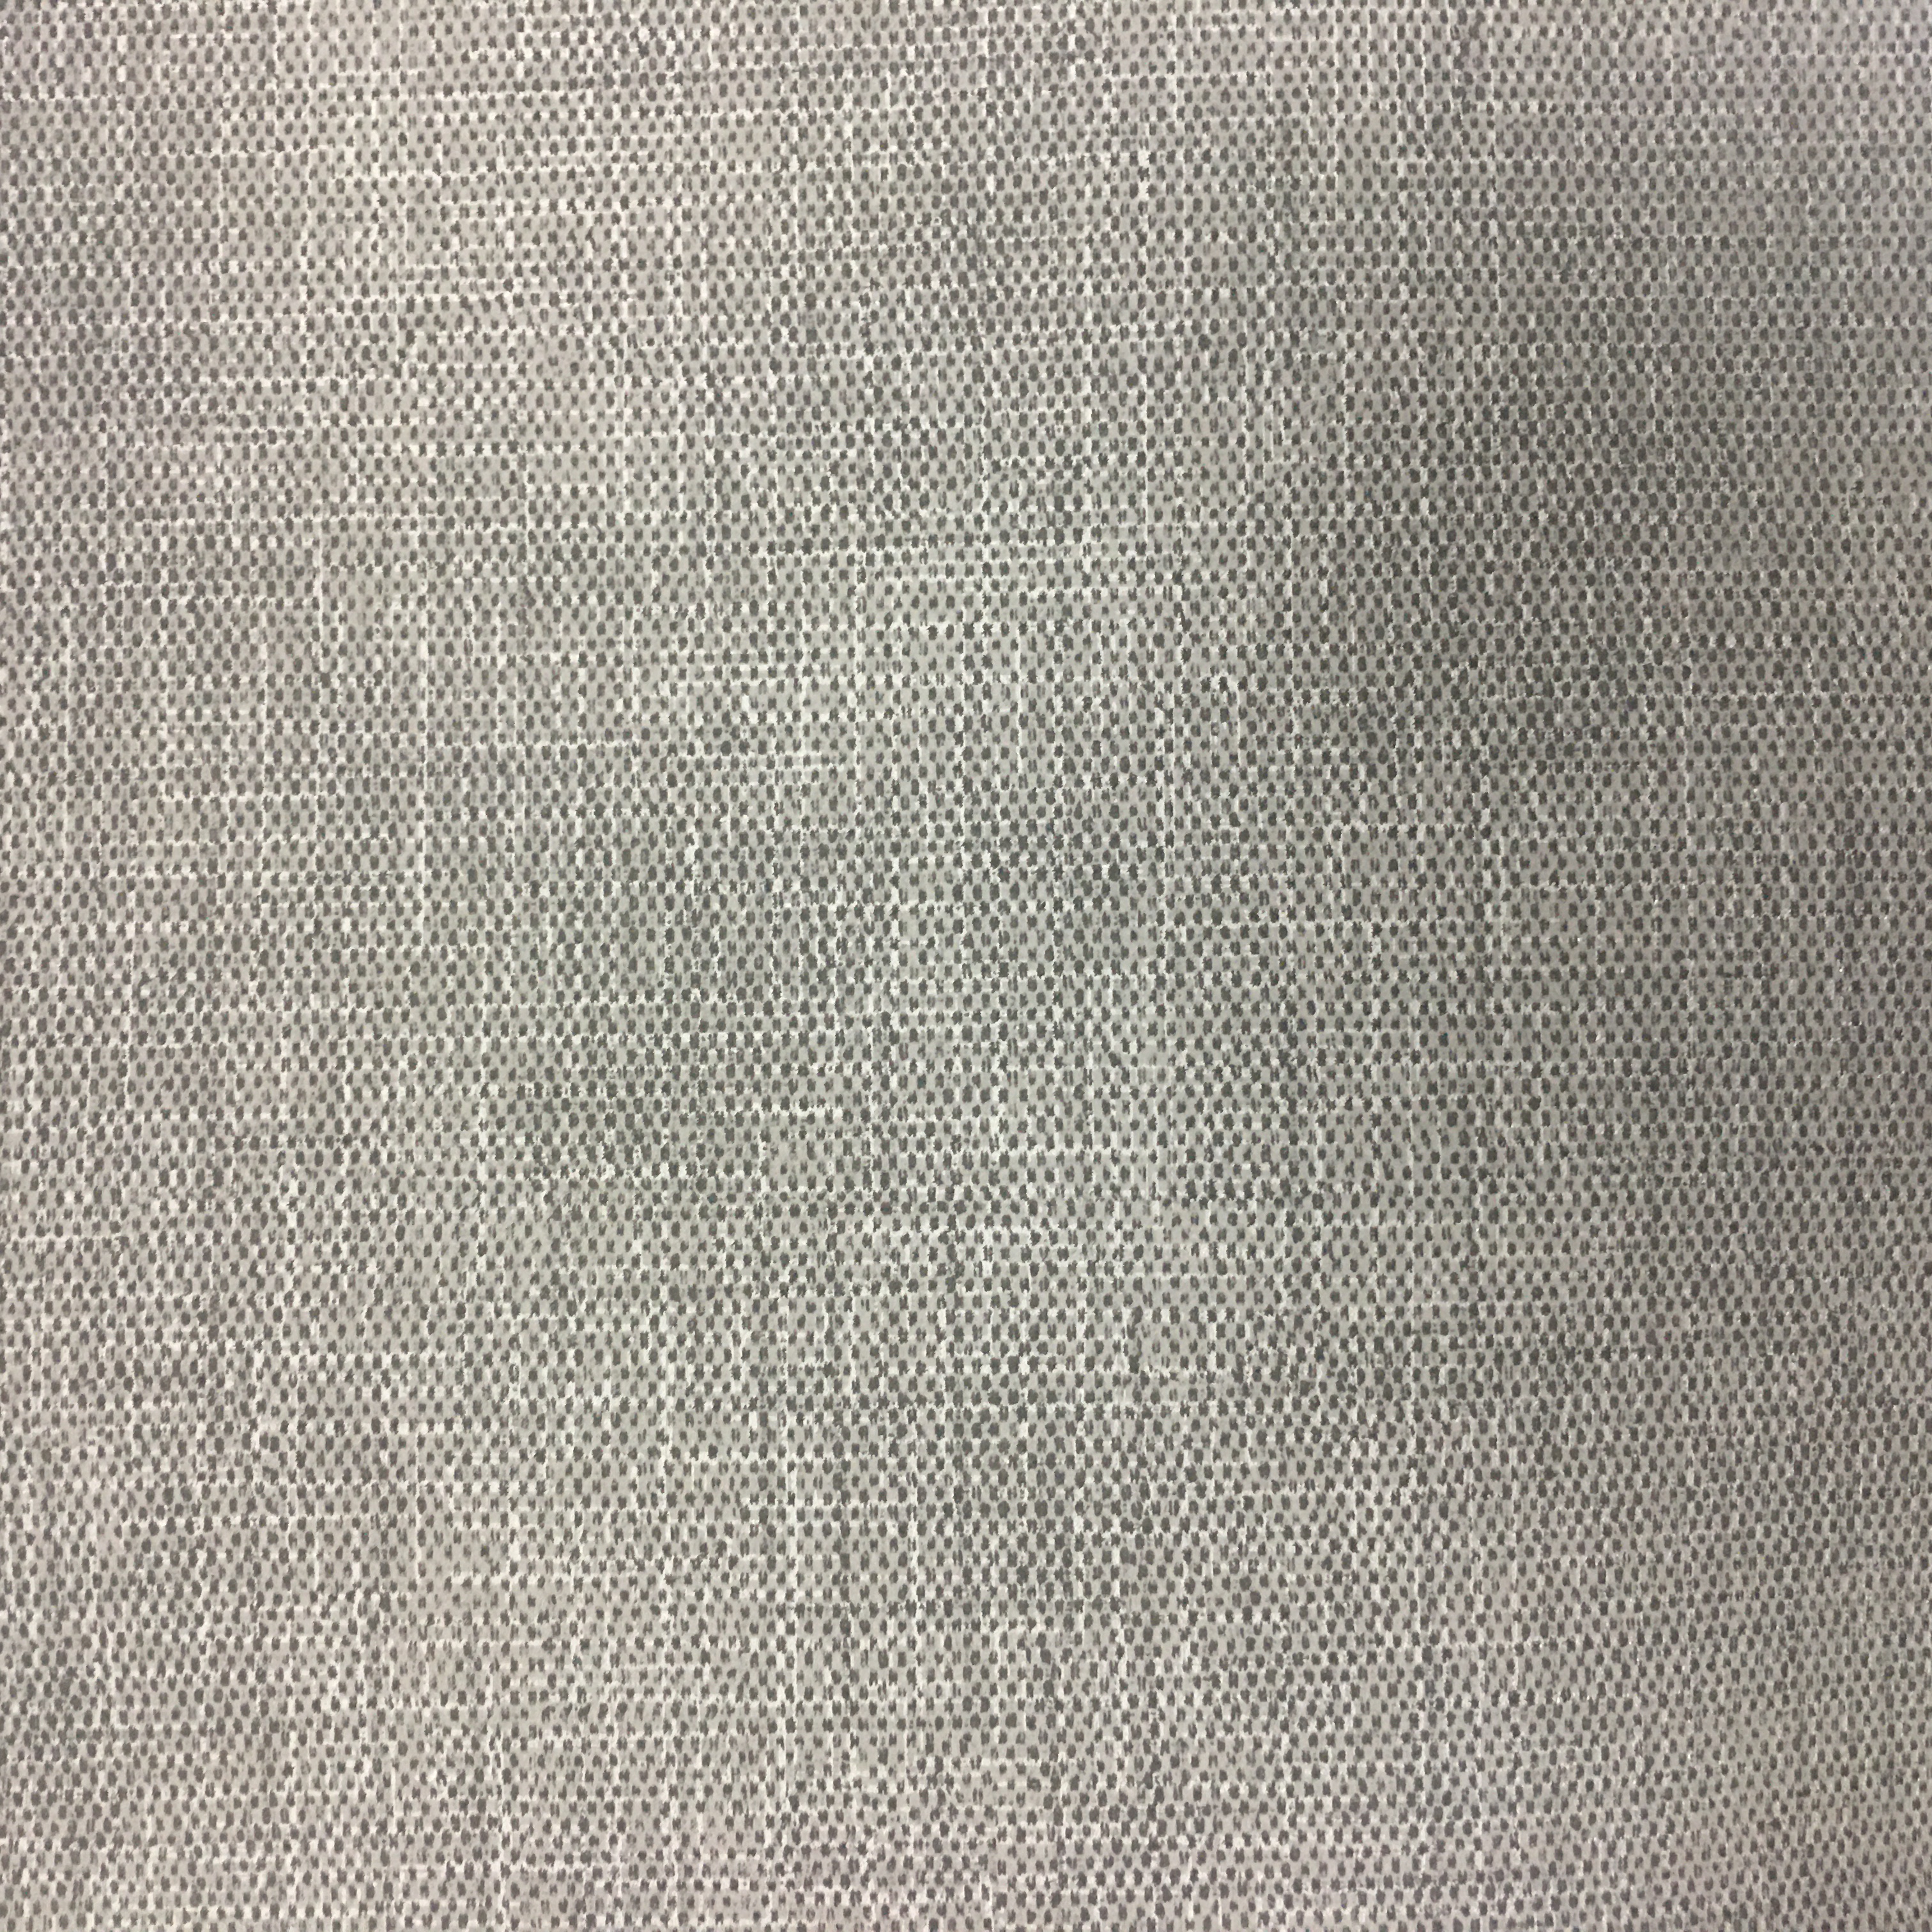 UV and cold resistant PU faux leather fabrics for contract furniture upholstery